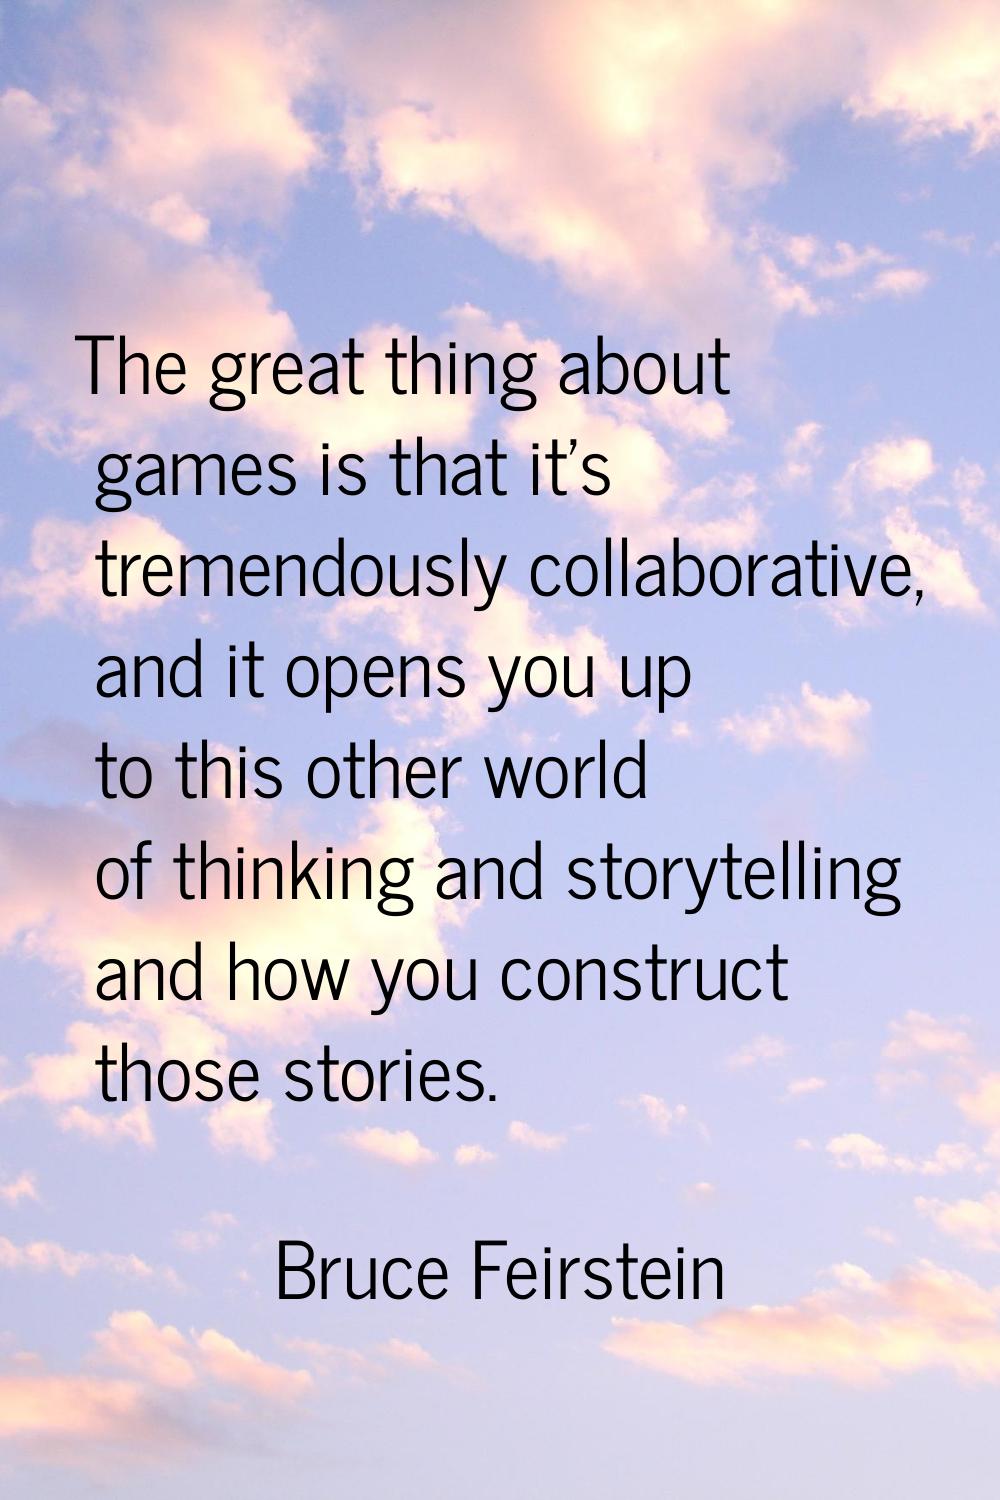 The great thing about games is that it's tremendously collaborative, and it opens you up to this ot